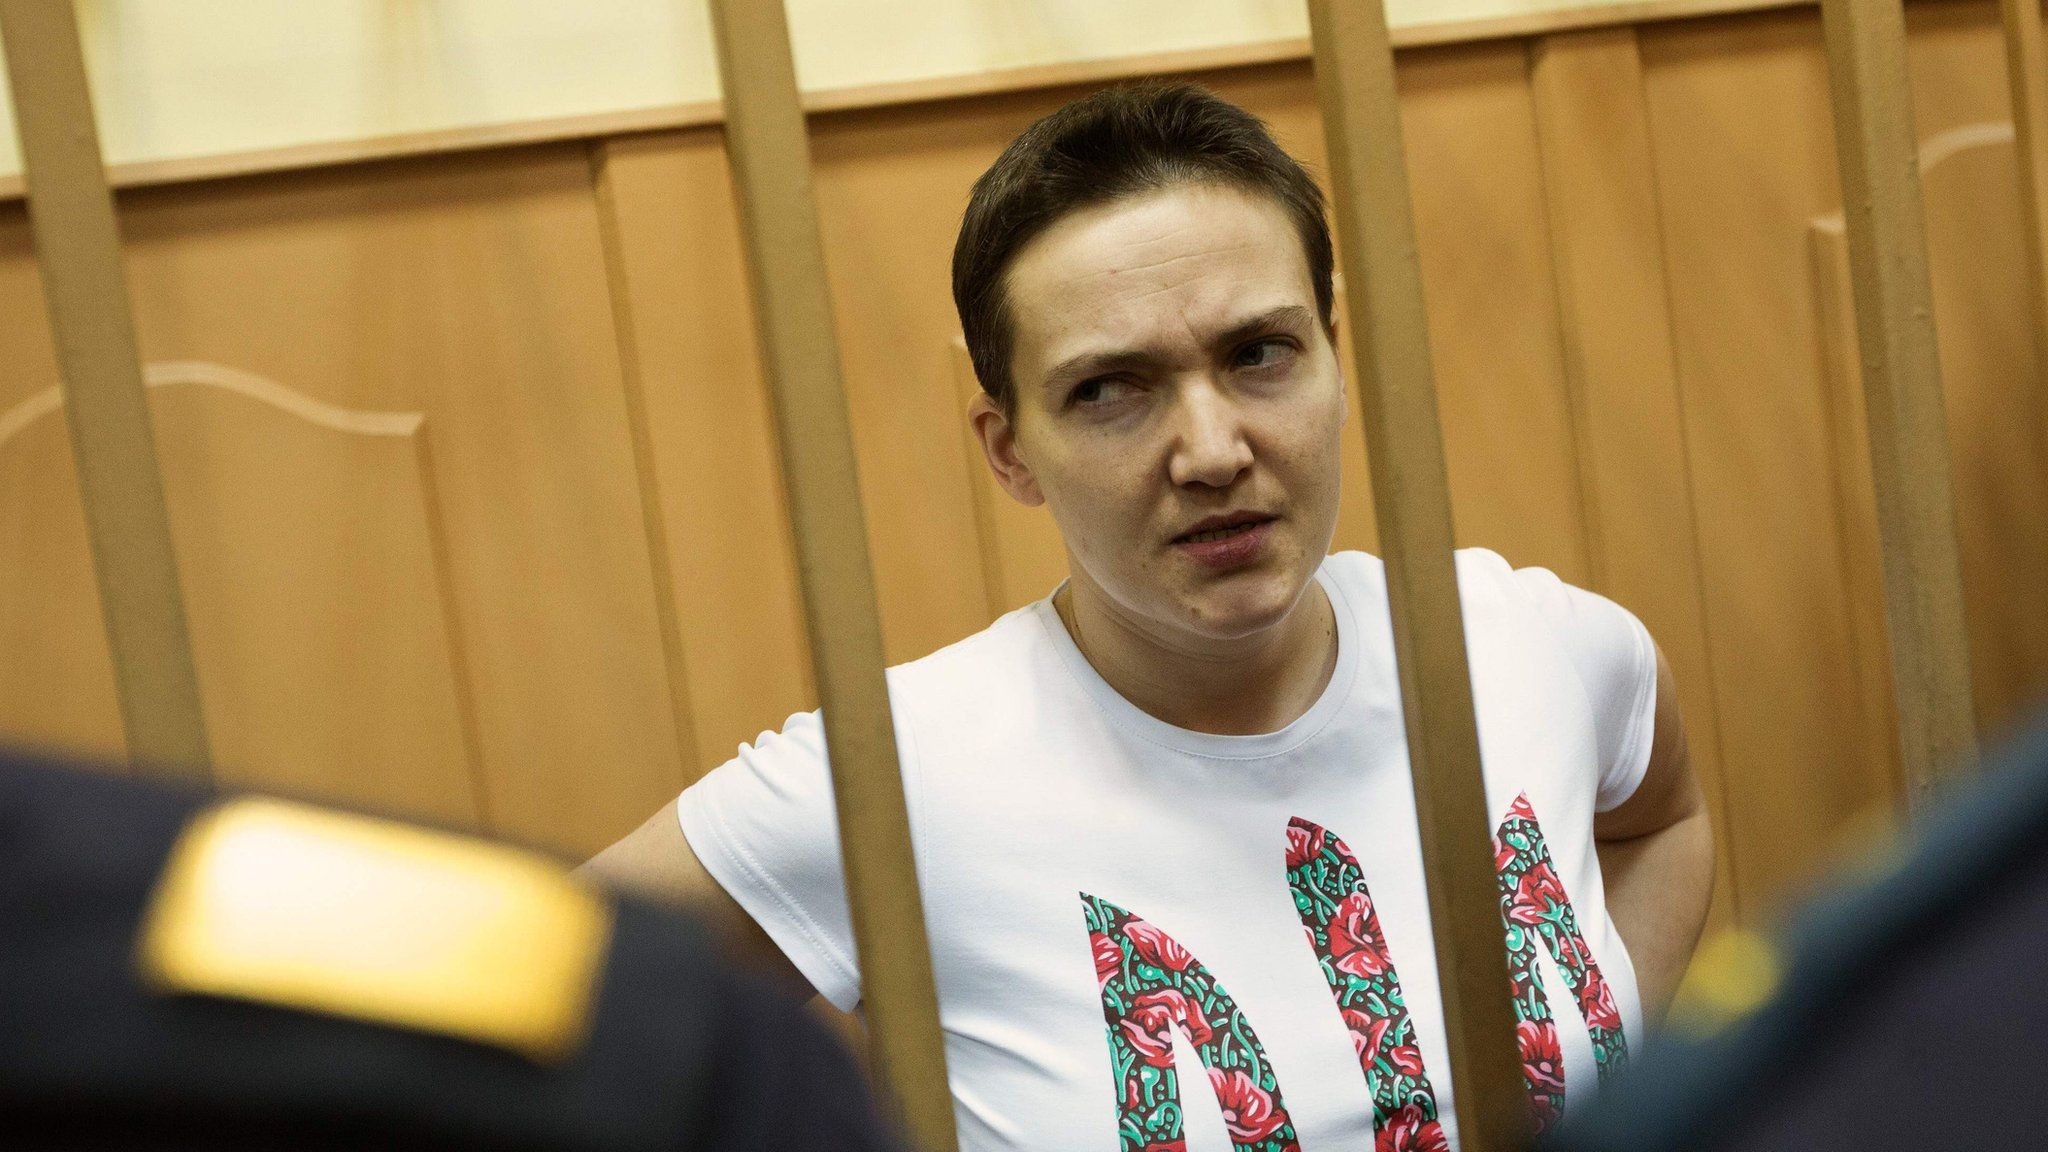 This file photo taken on November 7, 2014 shows Nadiya Savchenko standing inside the defendant"s cage during his hearing in the Basmanny district court in Moscow. illegally.